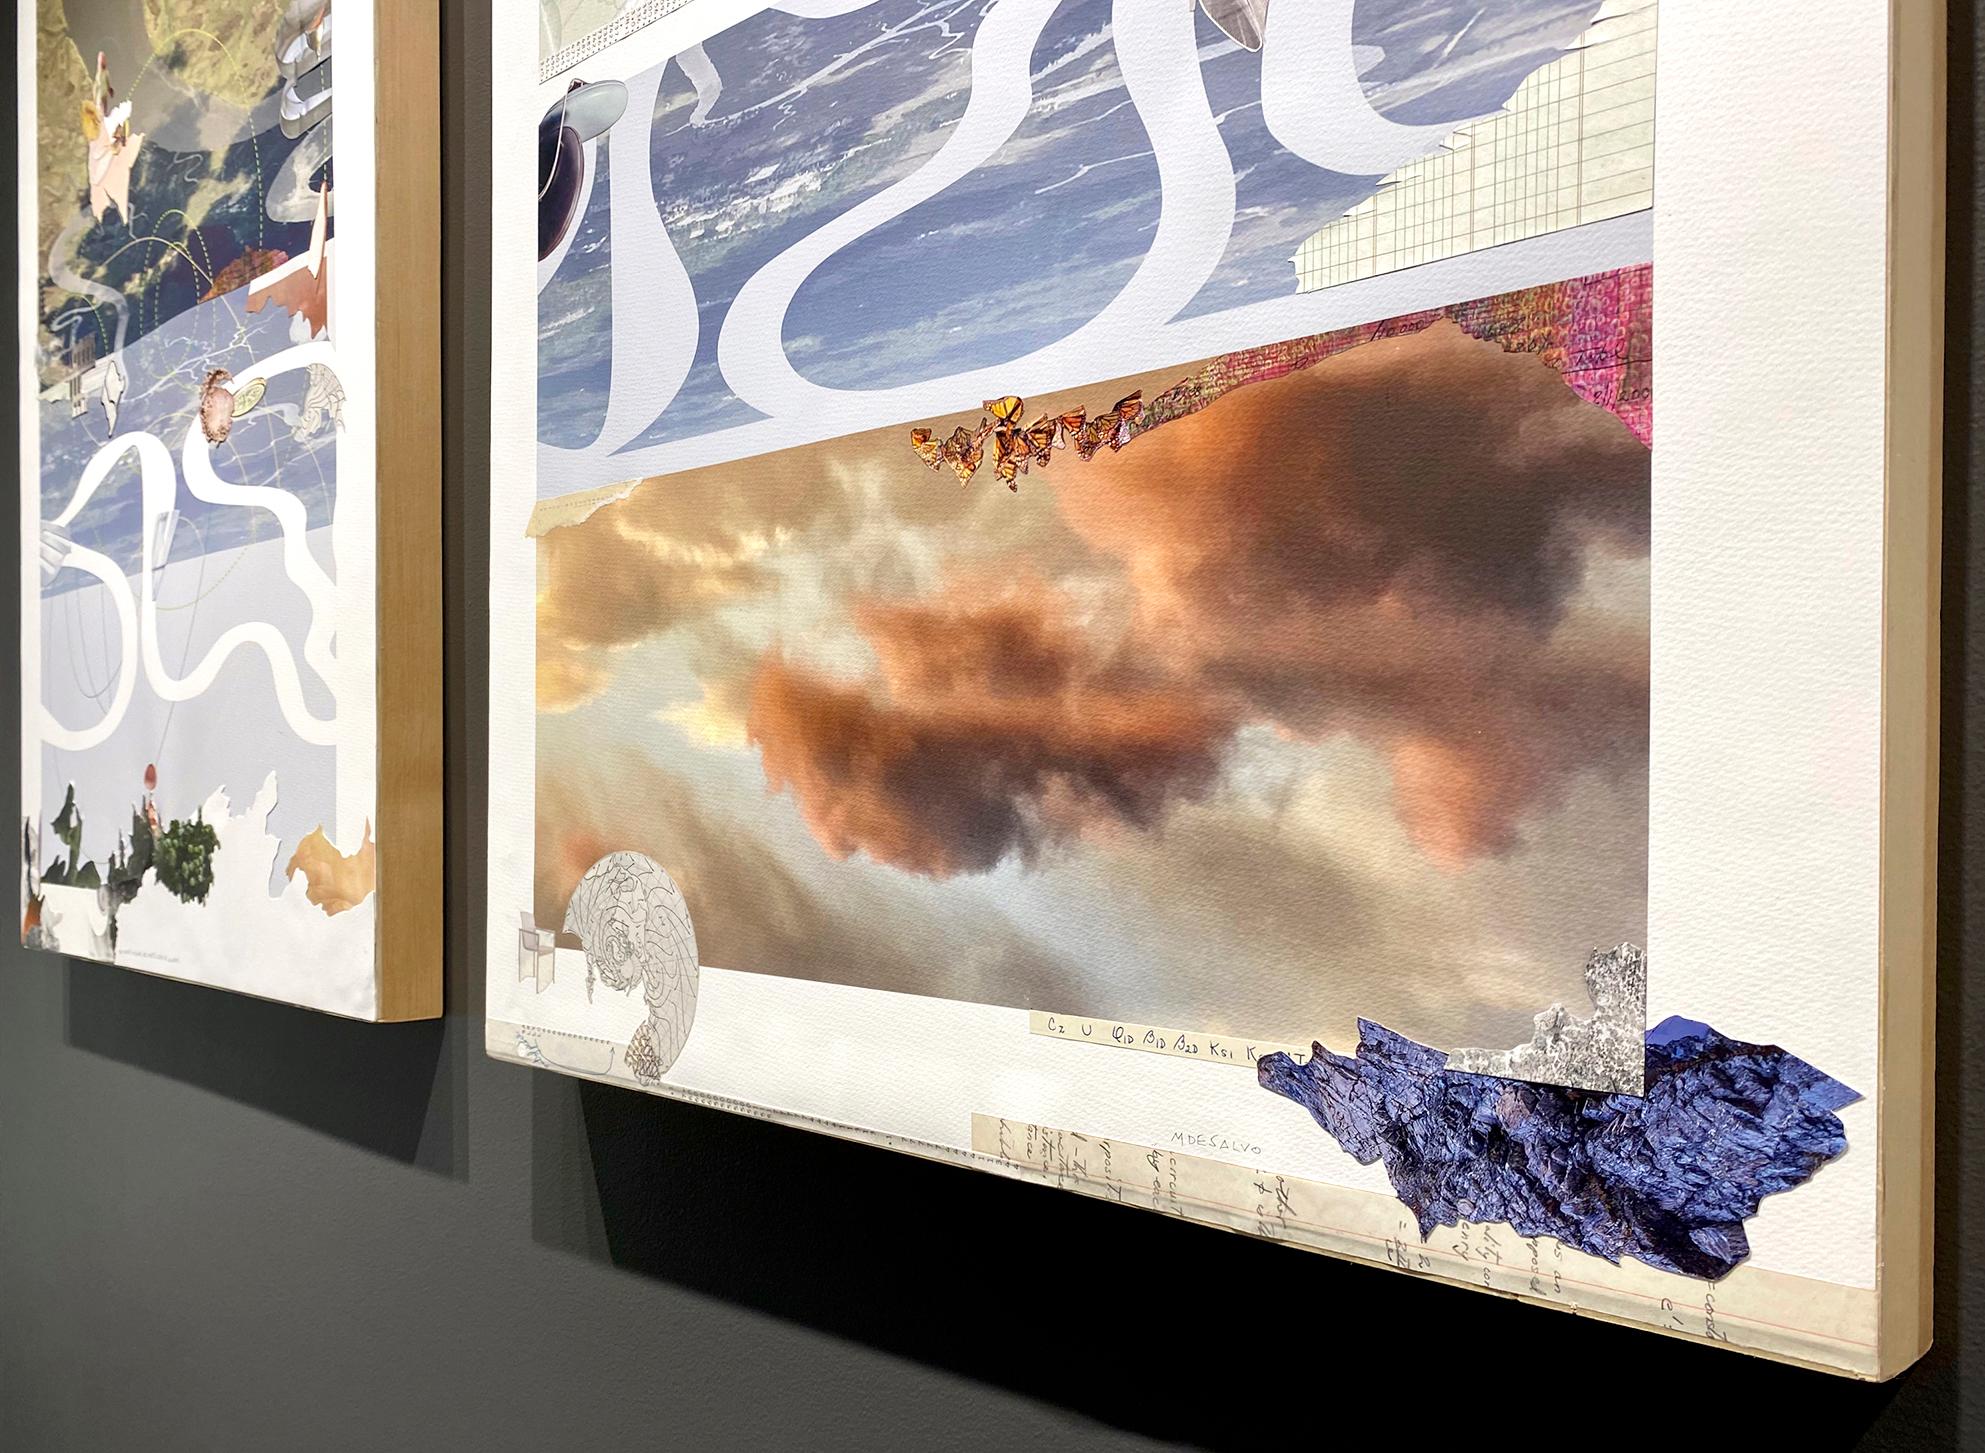 Monica DeSalvo’s “The house is gone—all that’s left is a wish,” is a diptych with two 36 x 24 inch surreal collages over digital montages first printed onto watercolor paper. Aerial photos of winding blue rivers, expansive earth-toned landscapes,